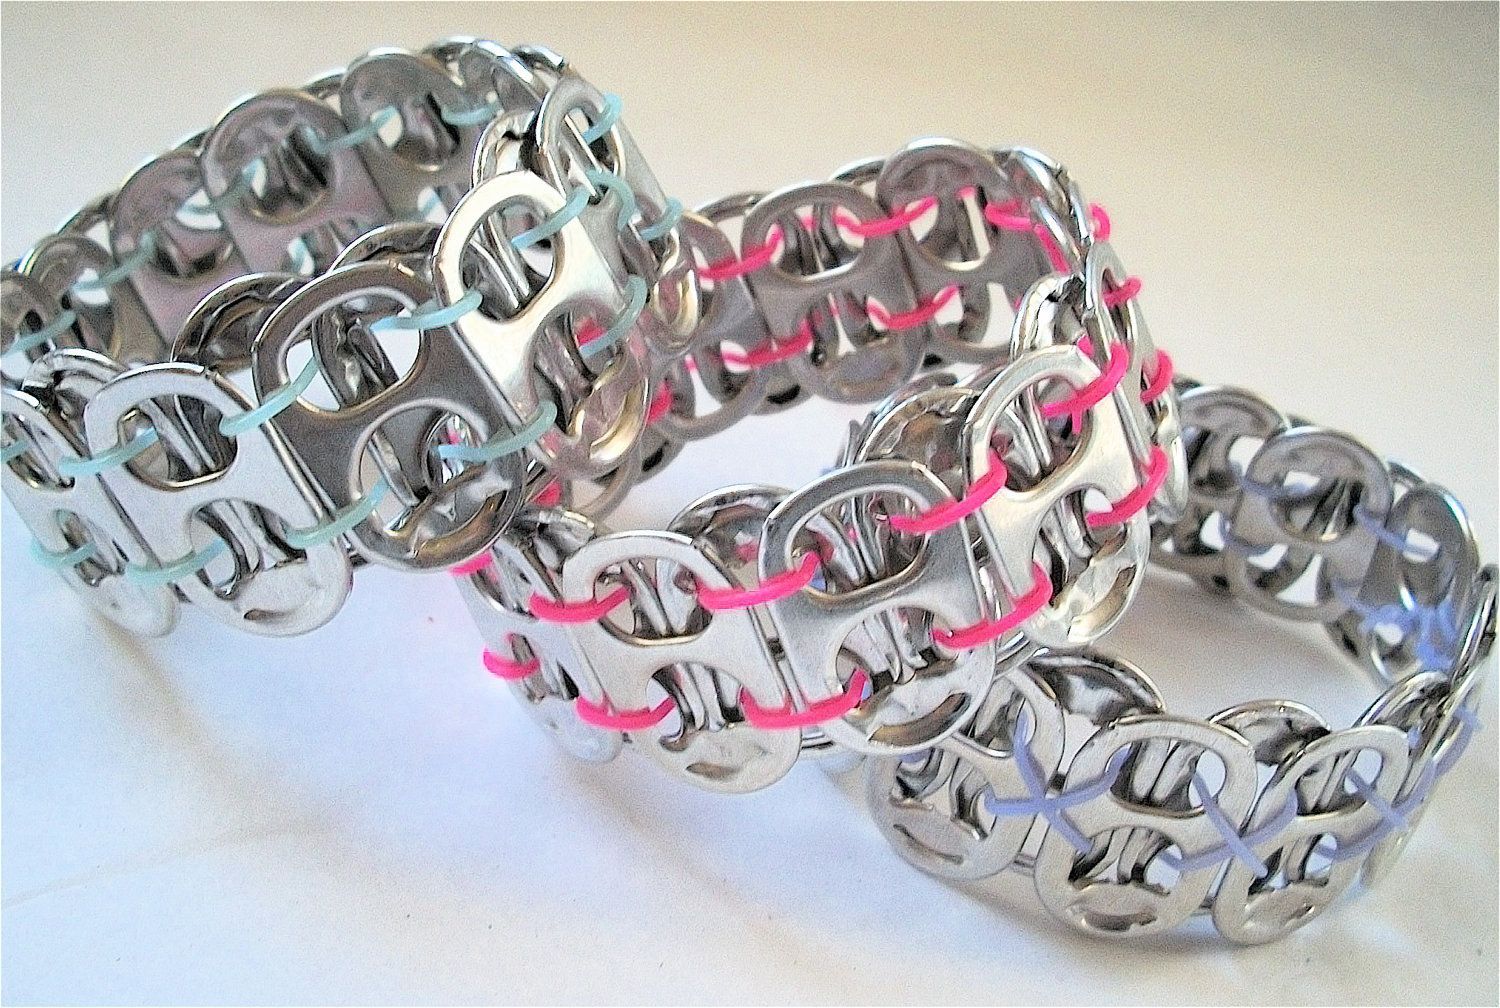 SODA TAB BRACELET - Simply Rosy - for teens and adults - eco-friendly/upcycled/recycled jewelry - under 10.00 -   20 recycled crafts for adults
 ideas